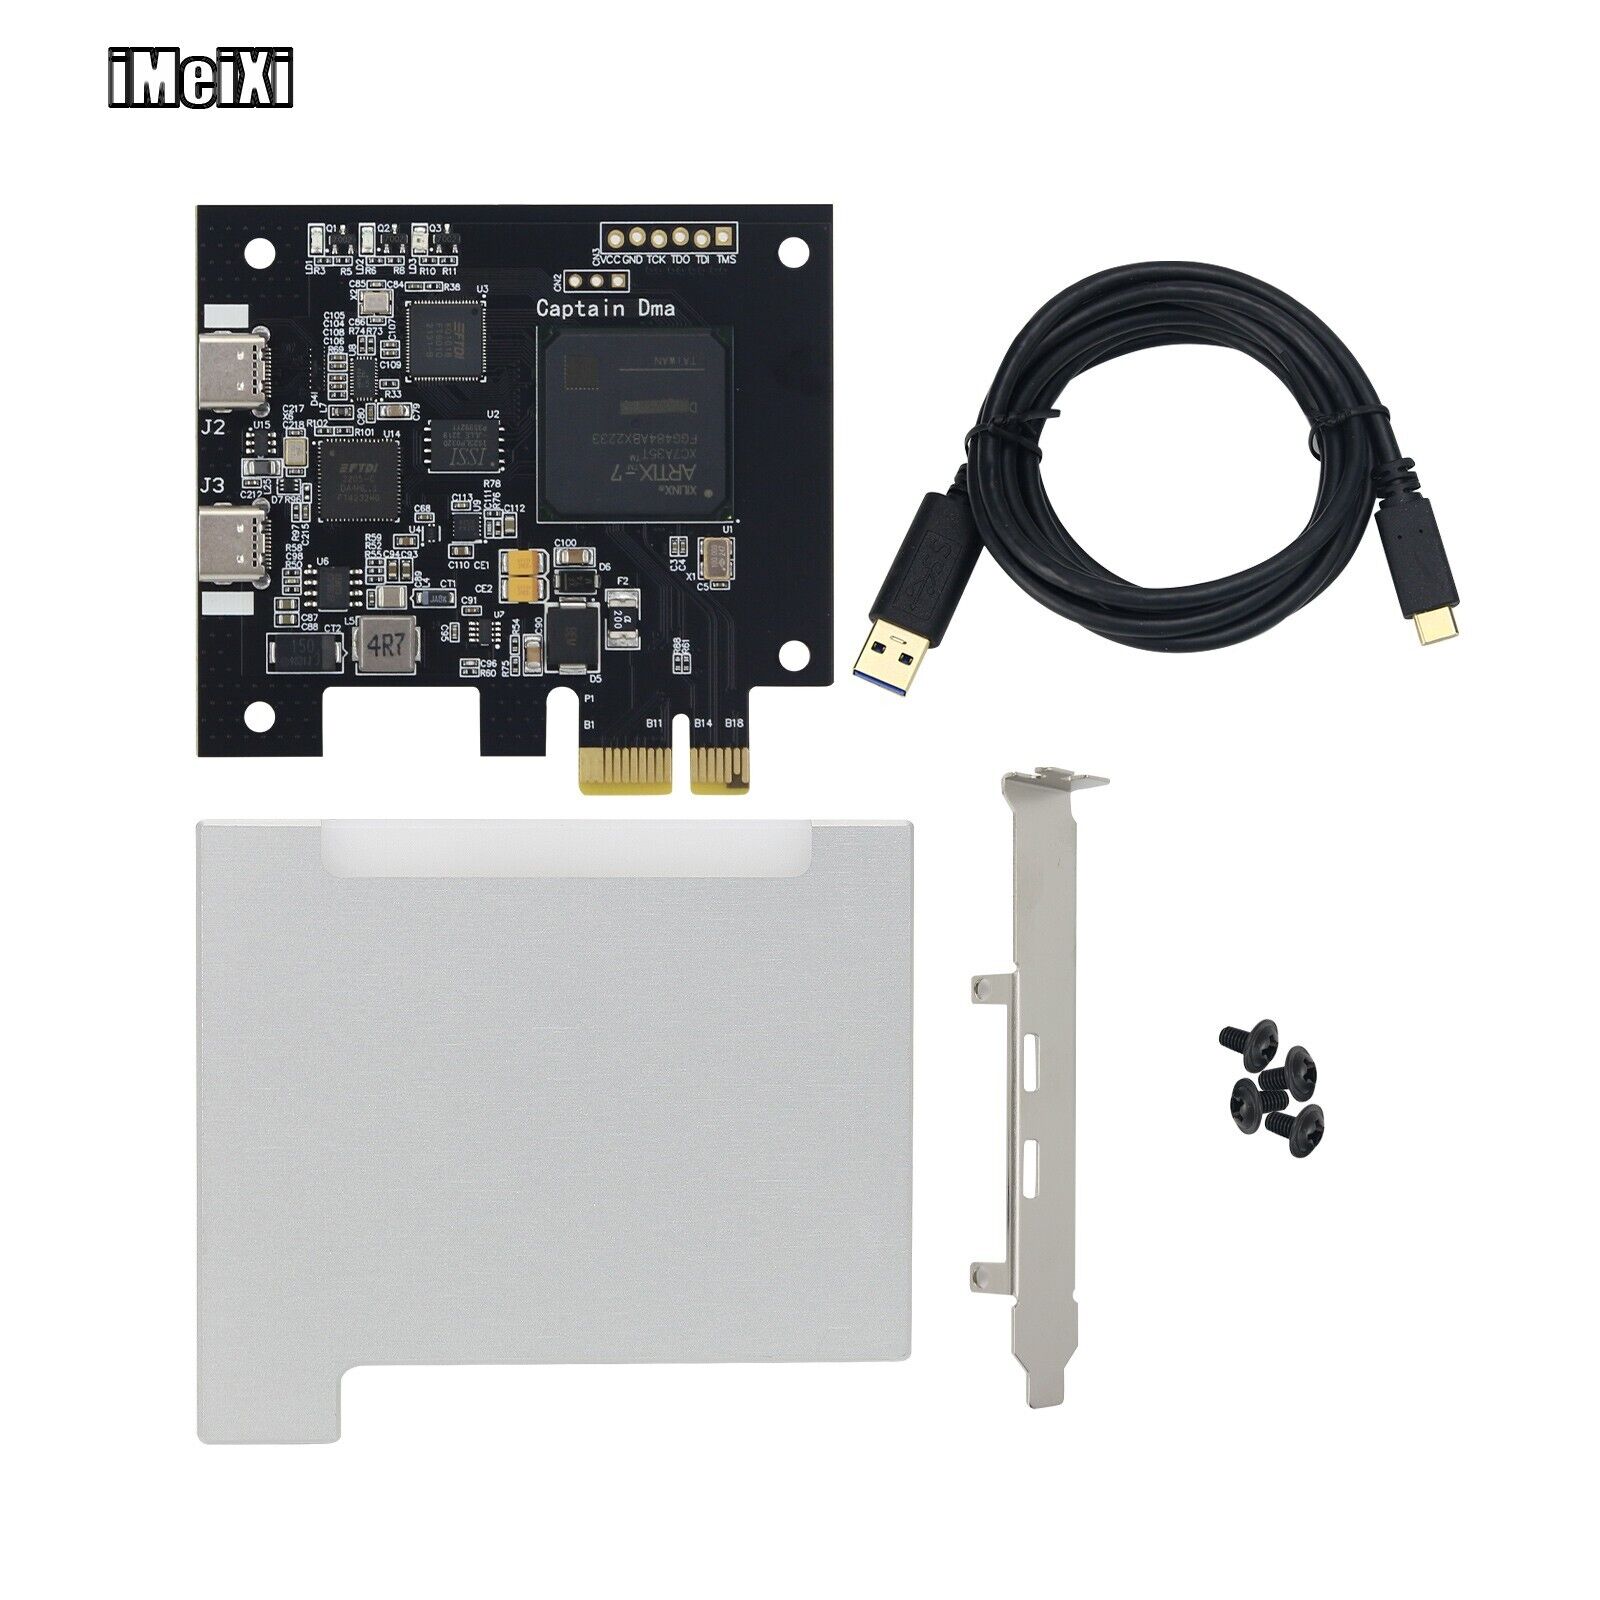 Captain DMA Board Direct Memory Access + 7-person Sil Shield Firmware for Kmbox